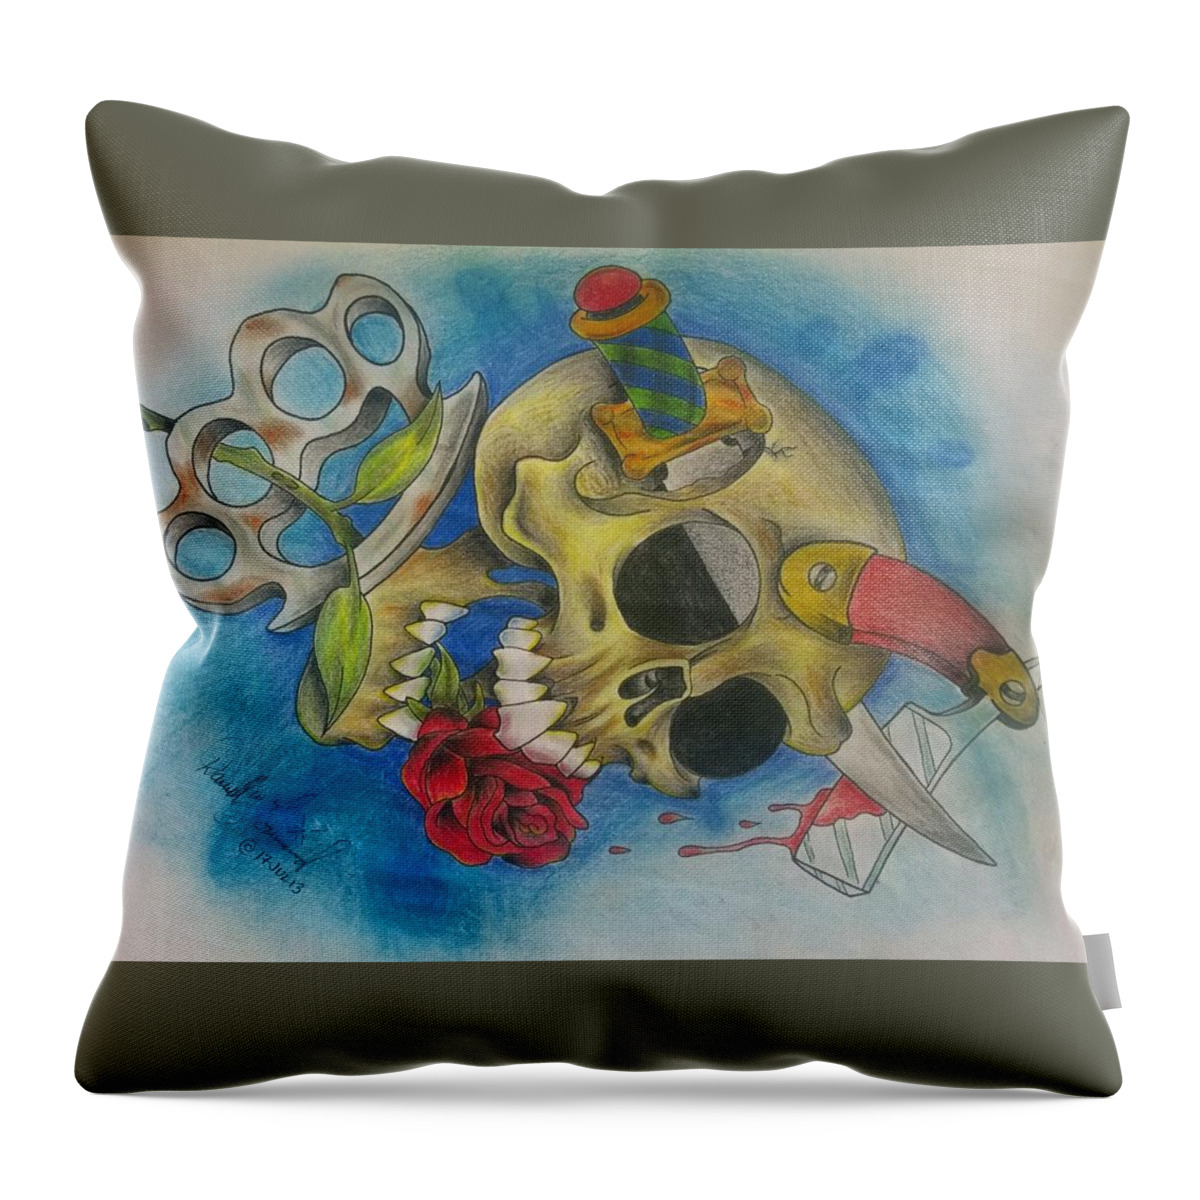 Skull With Rose Throw Pillow featuring the drawing Skull by Darrell Lormand